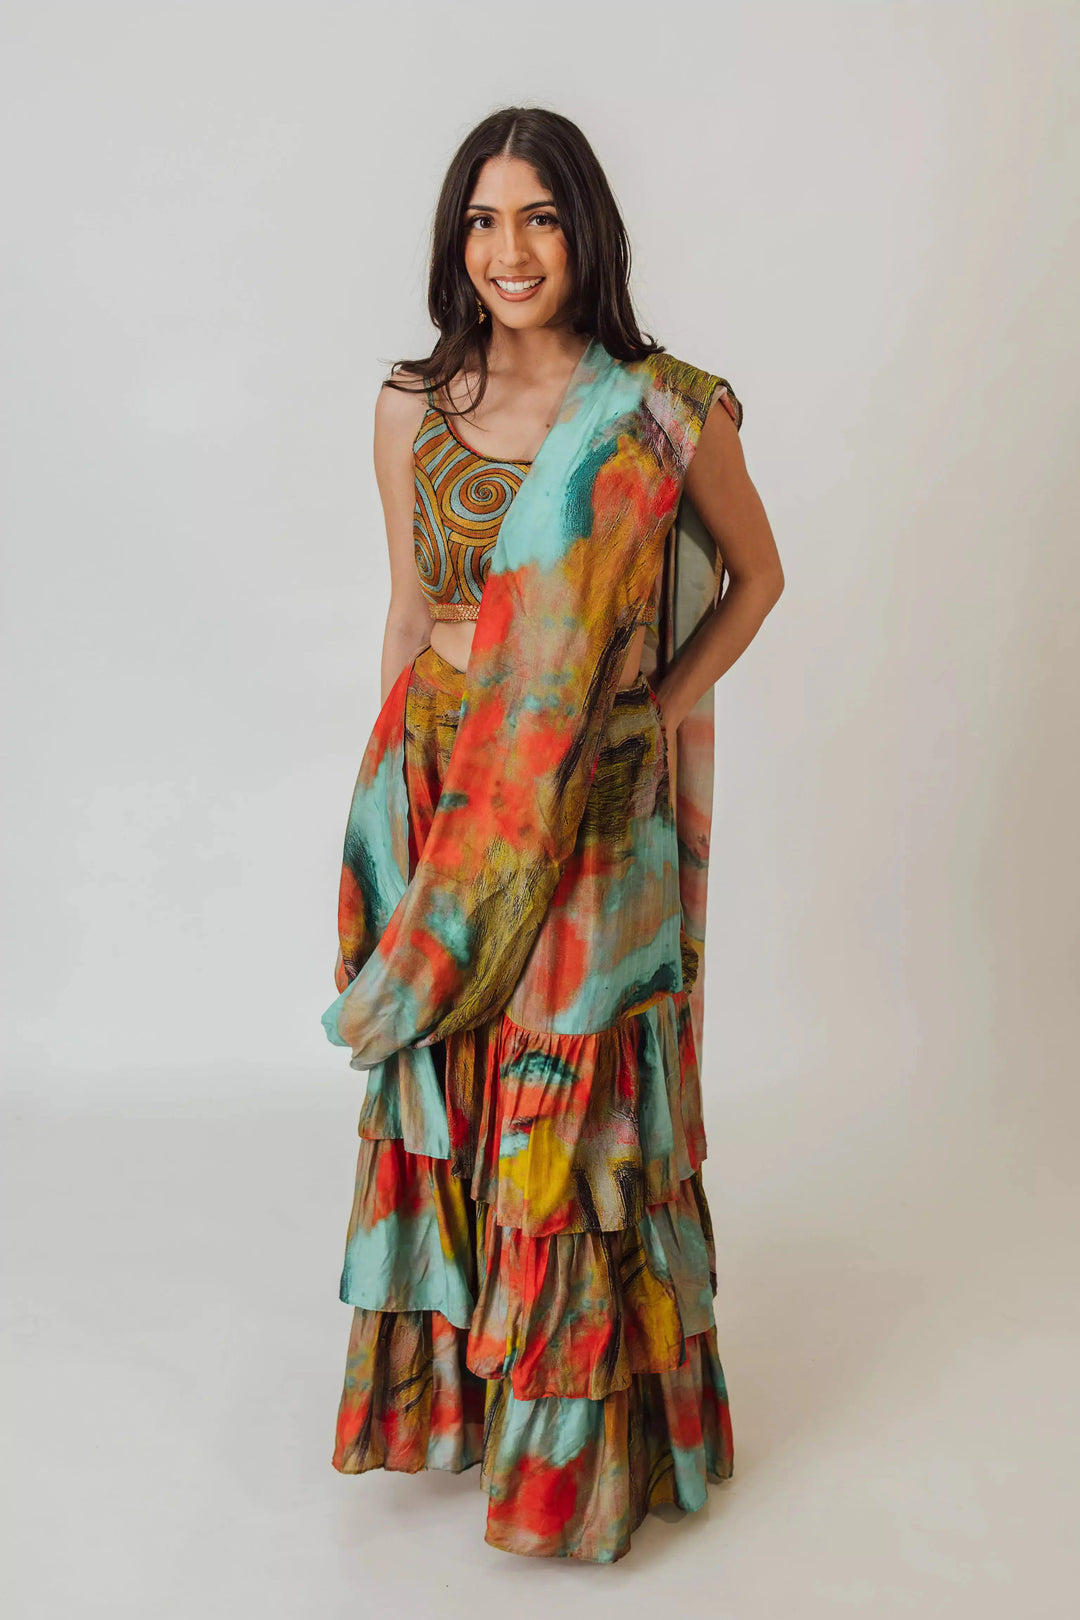 Kahlo Multicolor Swirl Top with Ruffle Tiered saree dress